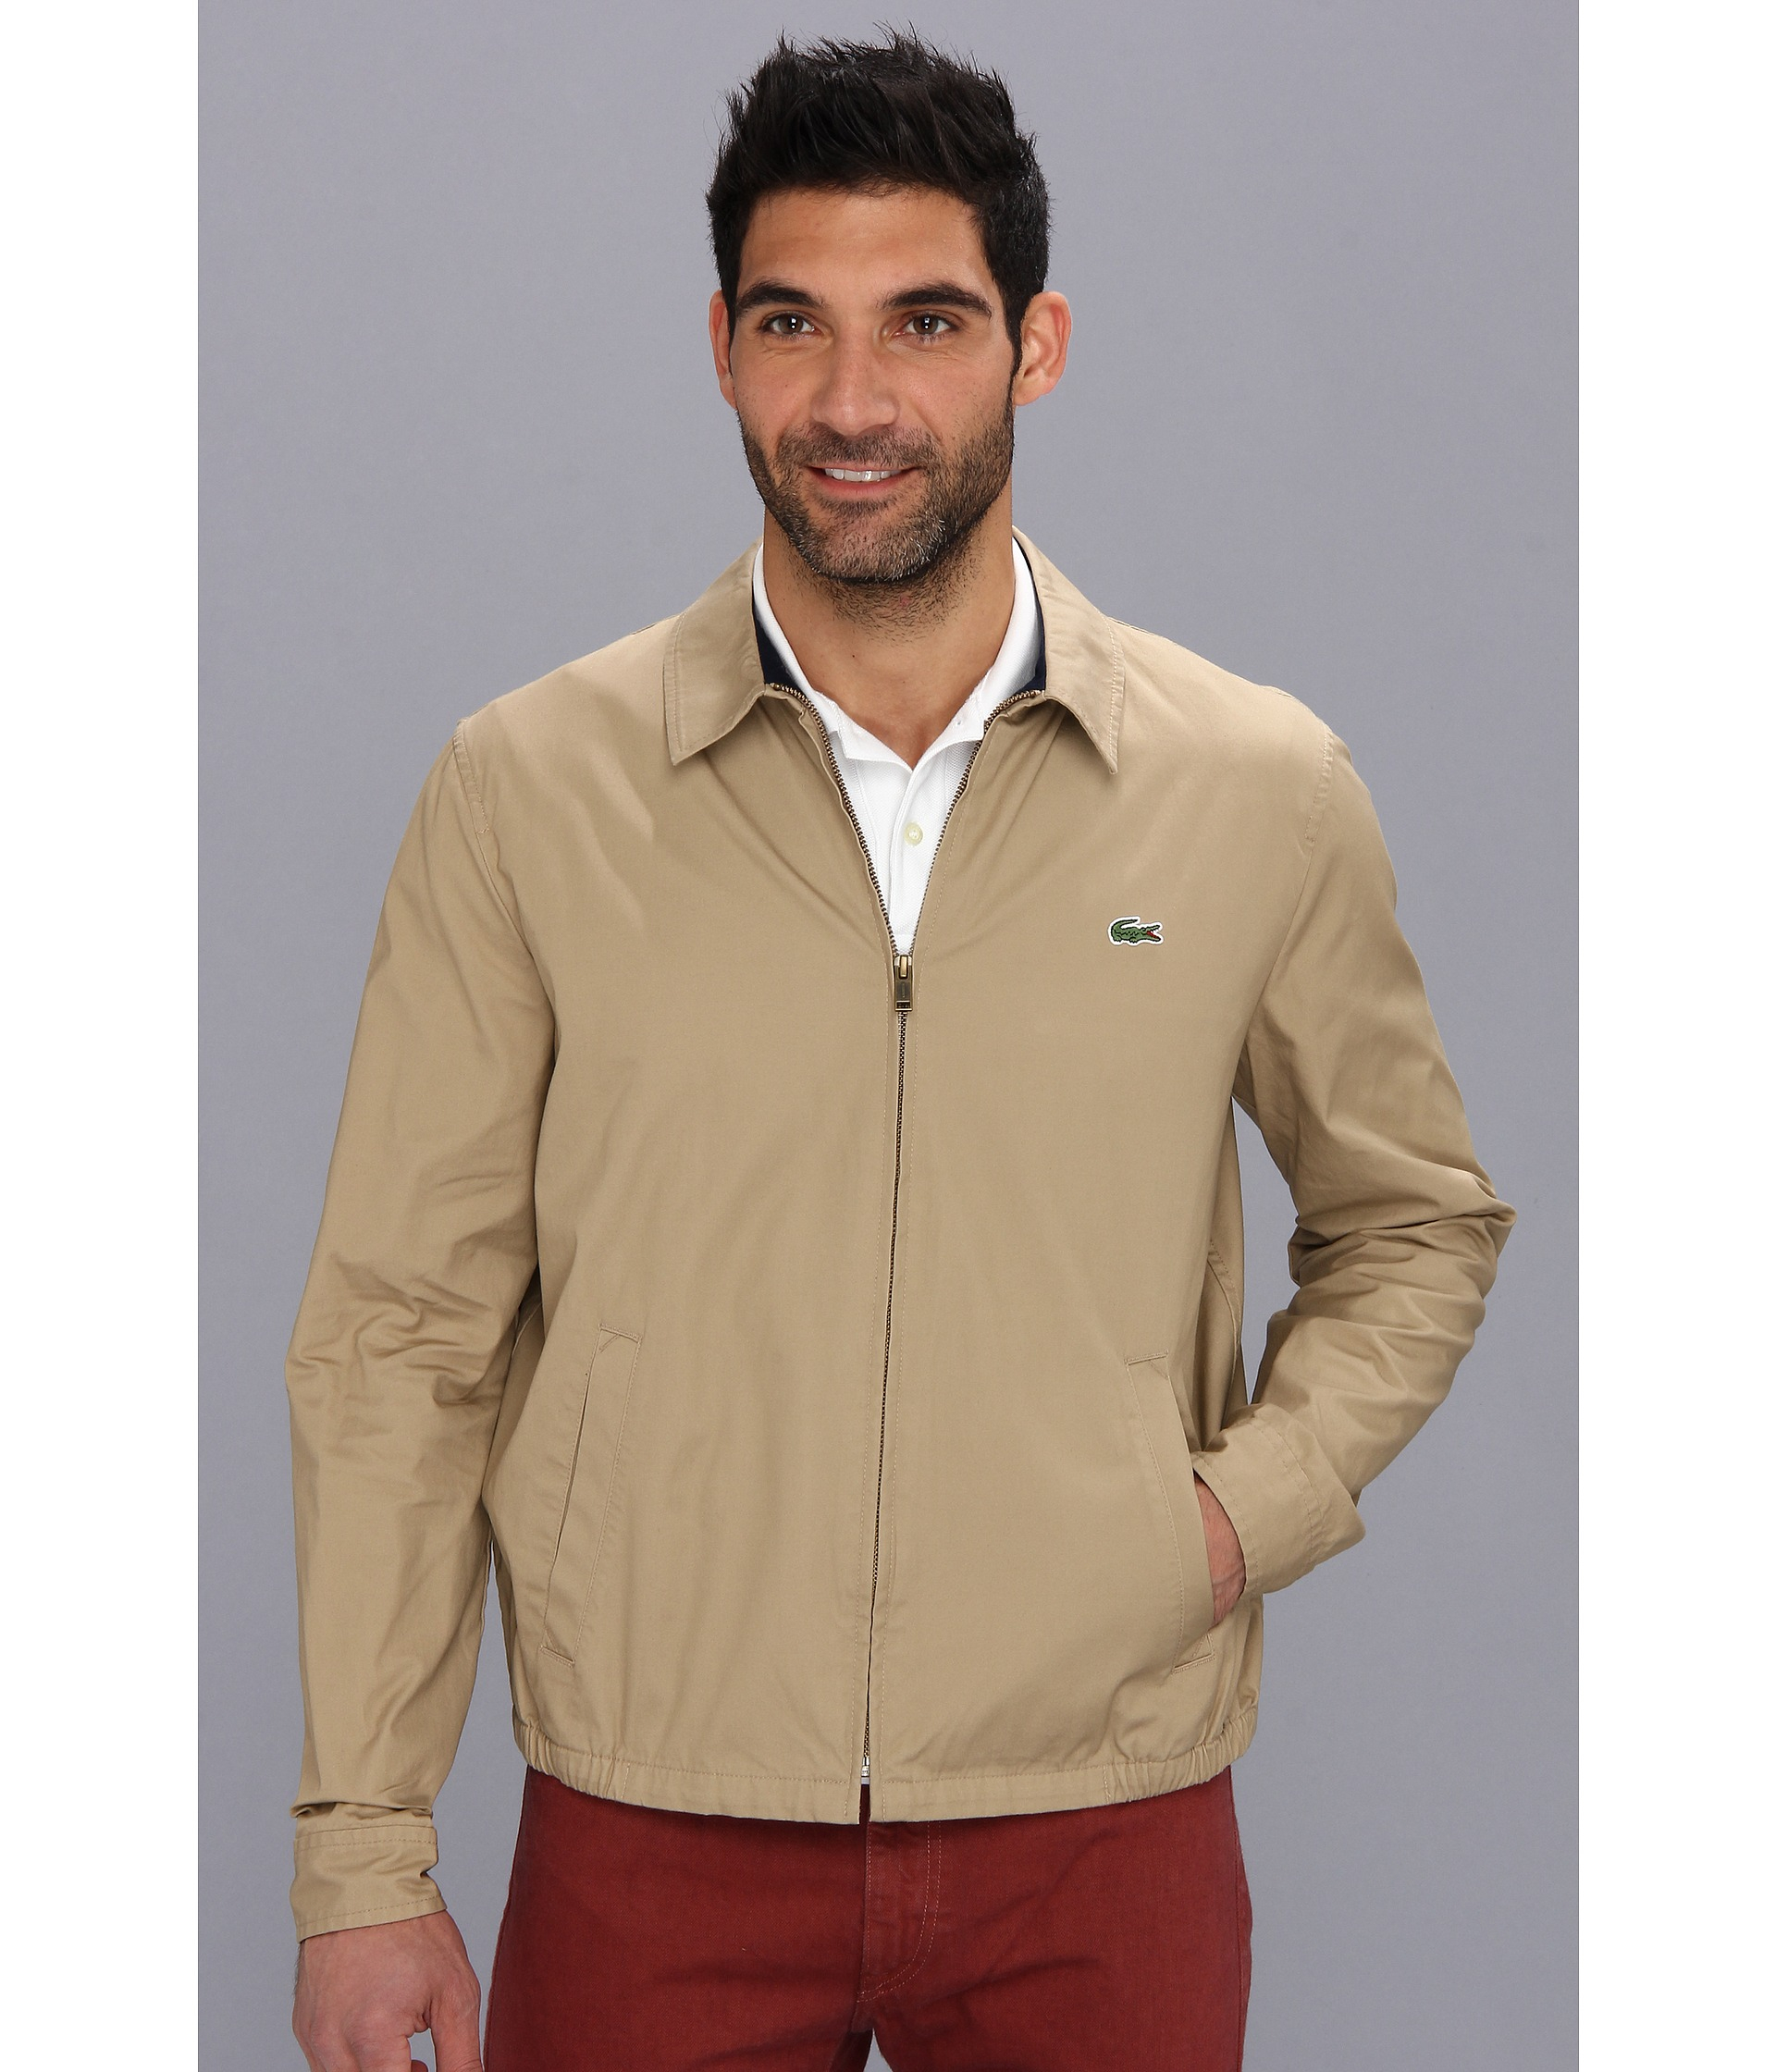 lacoste brown jacket